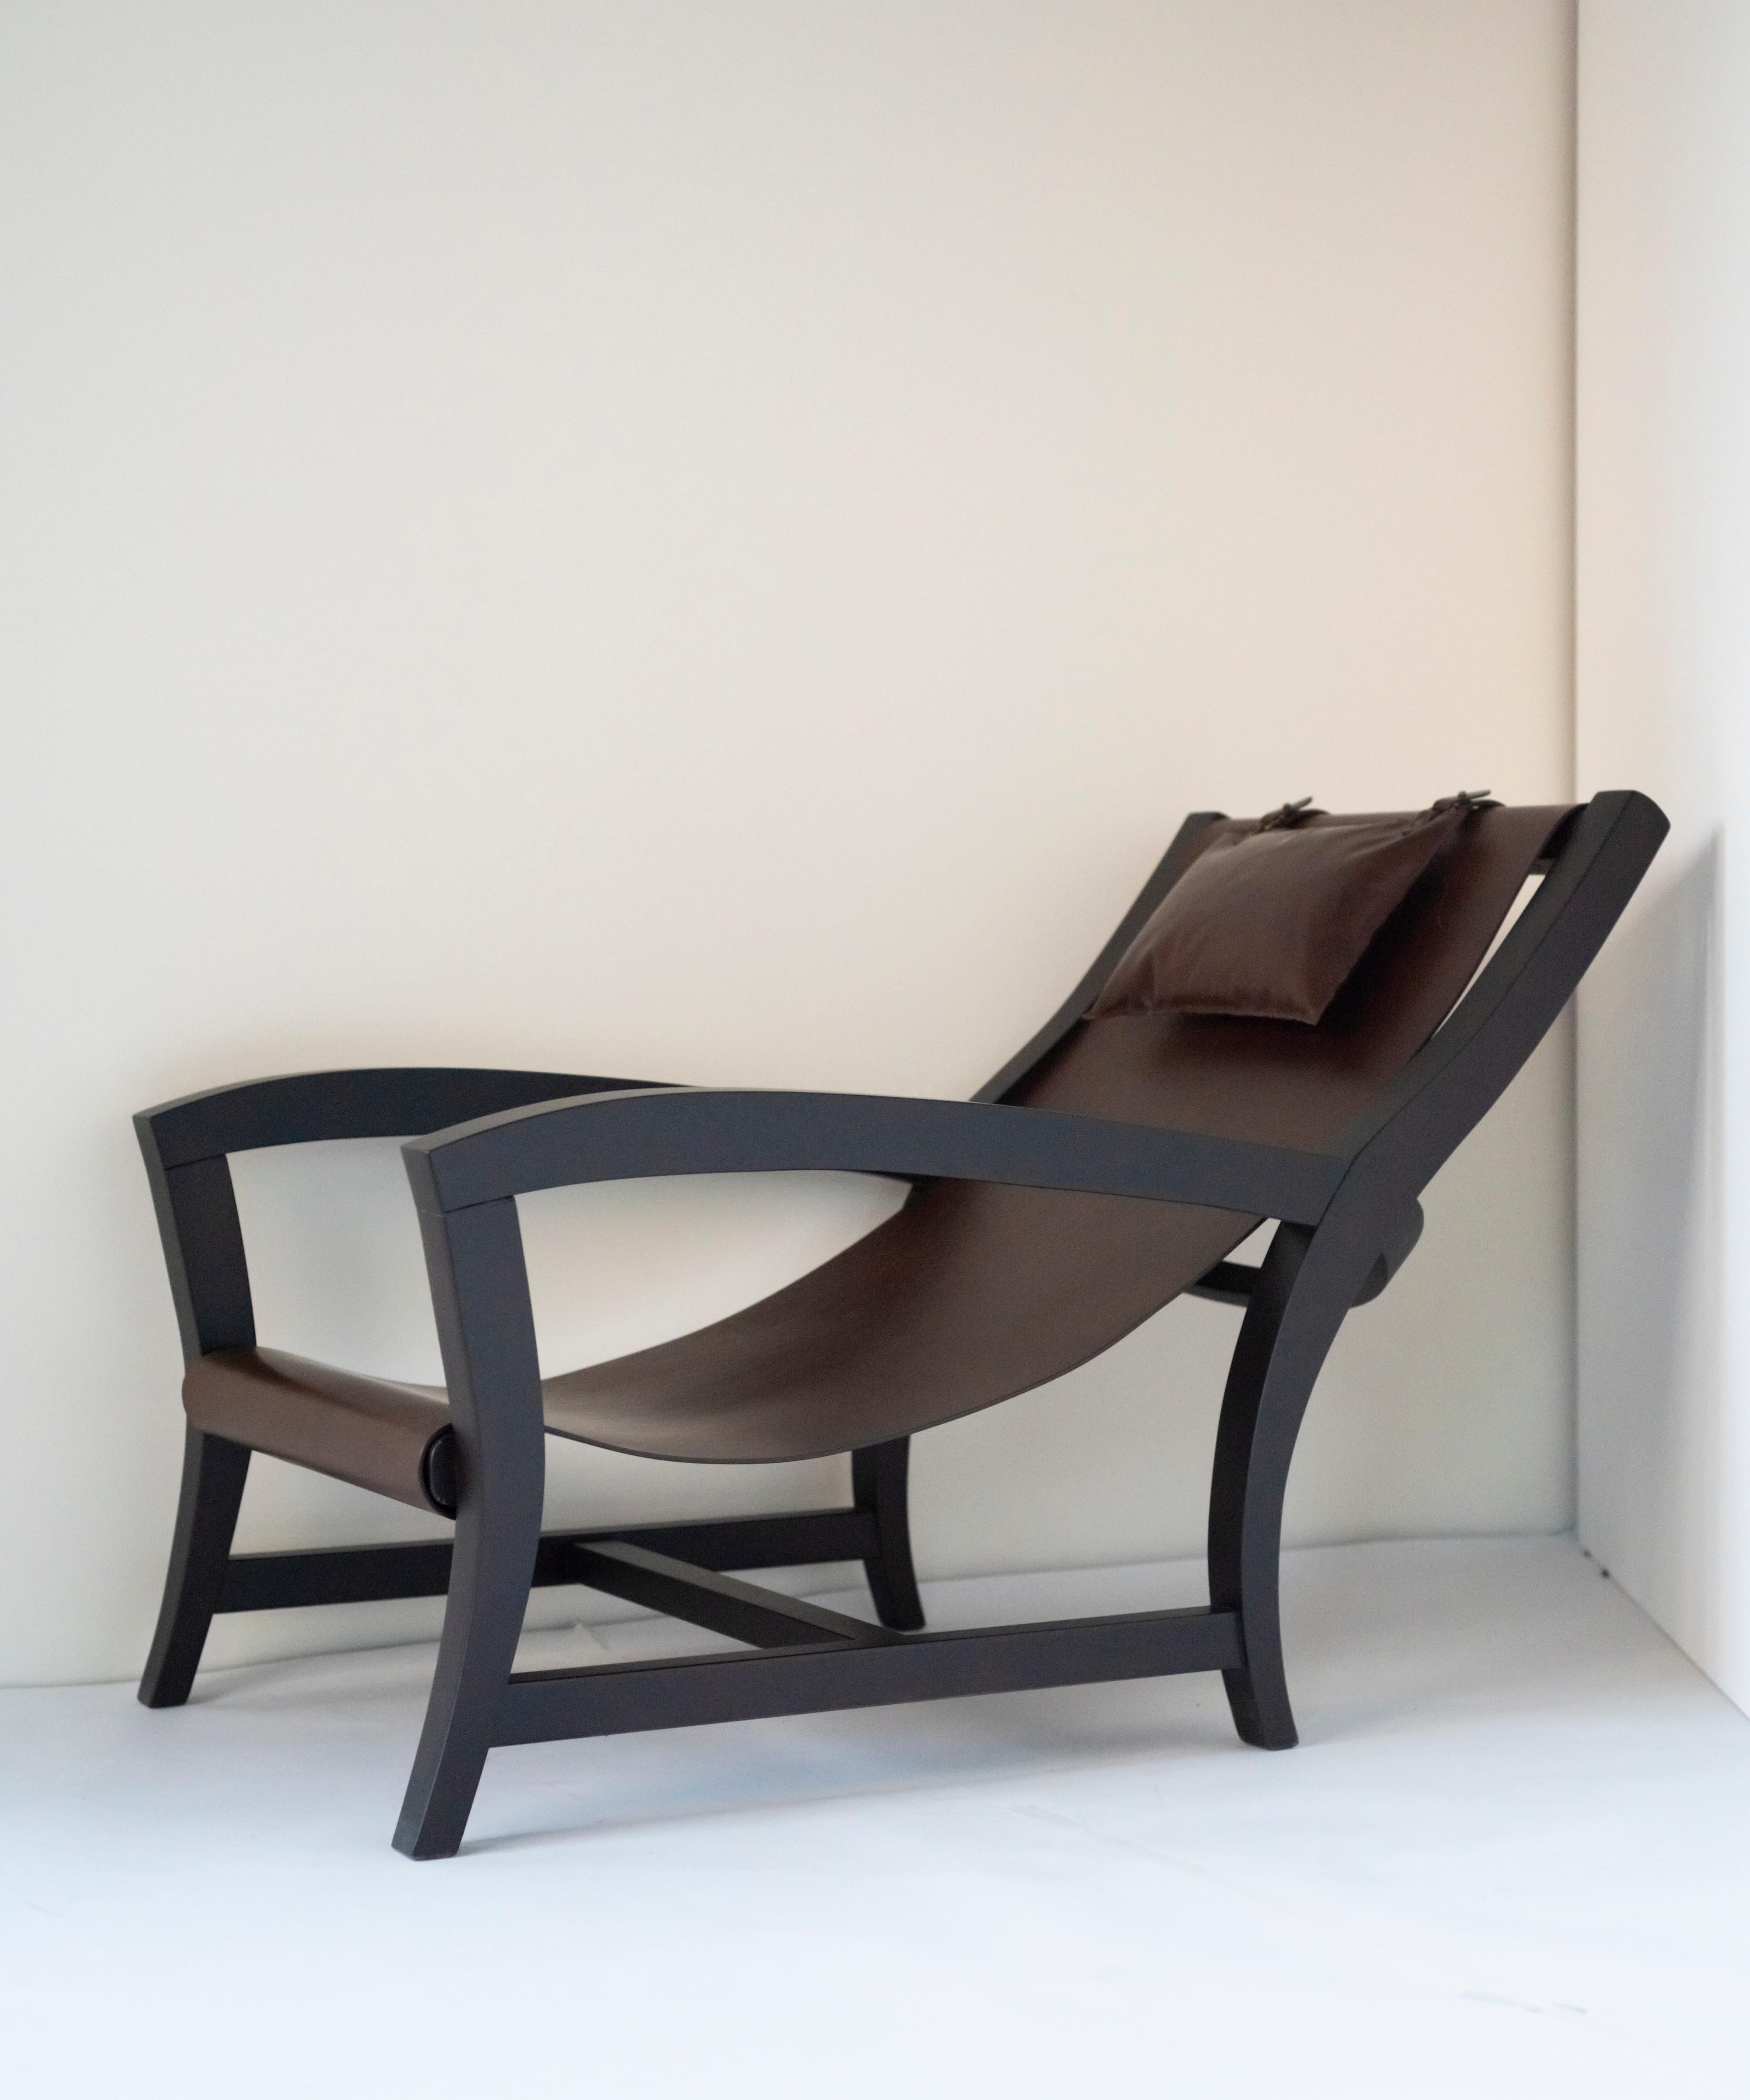 Elba, Deckchair Inspiration for This Leather and Beechwood Indoor Lounge Chair 2